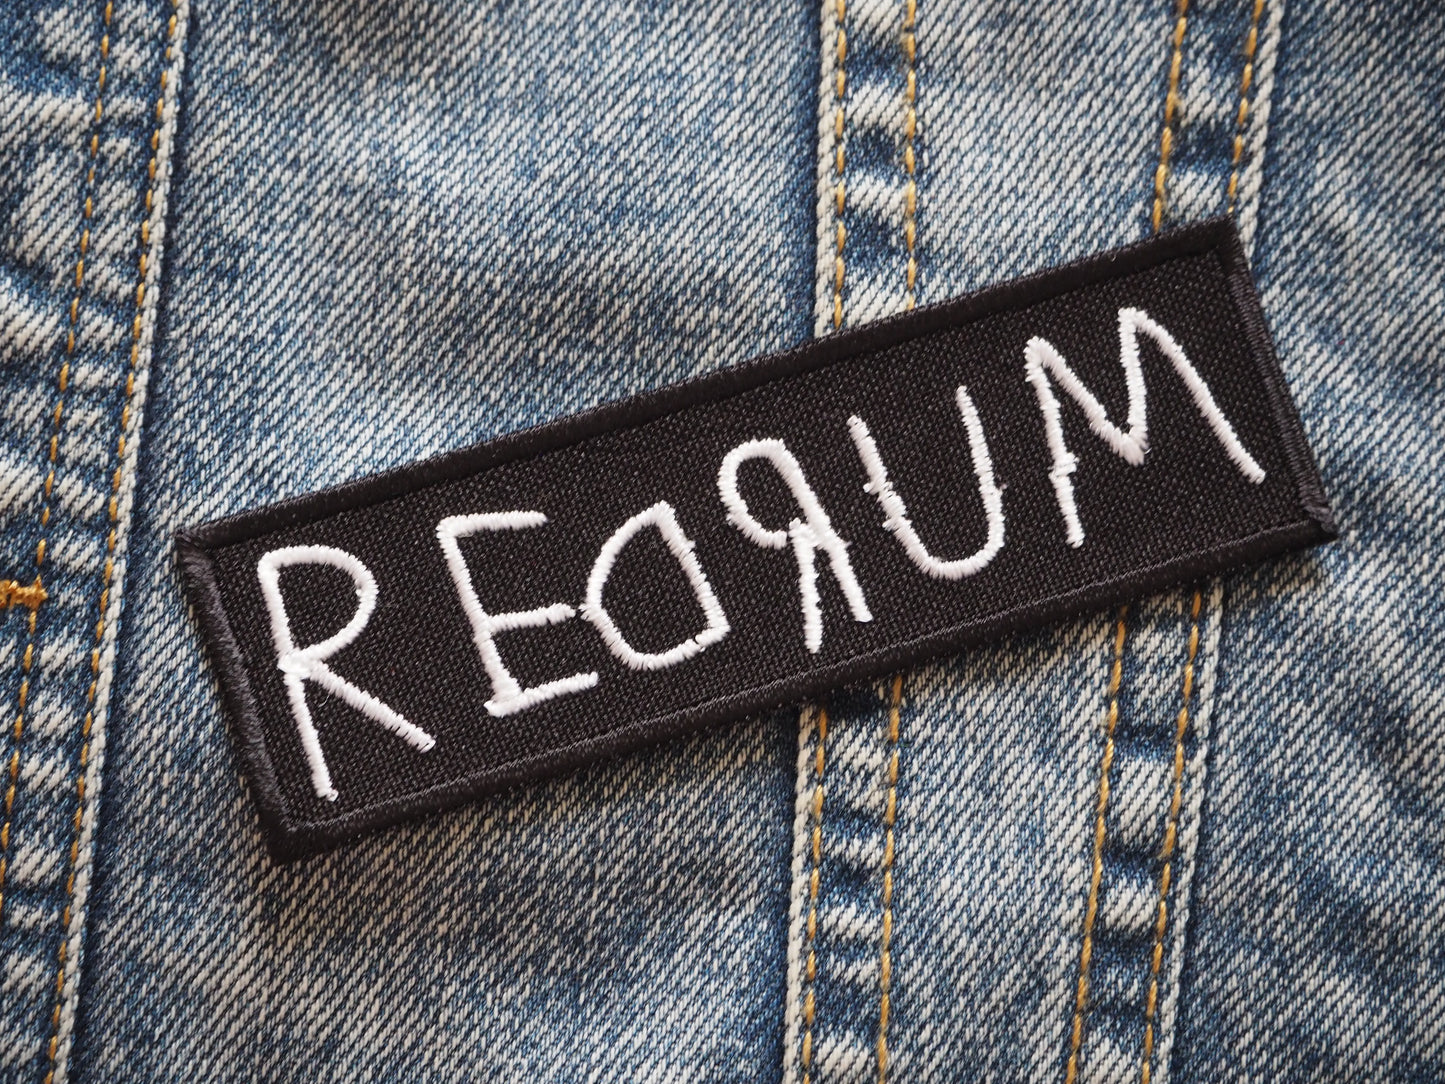 Redrum Horror Embroidered Patch